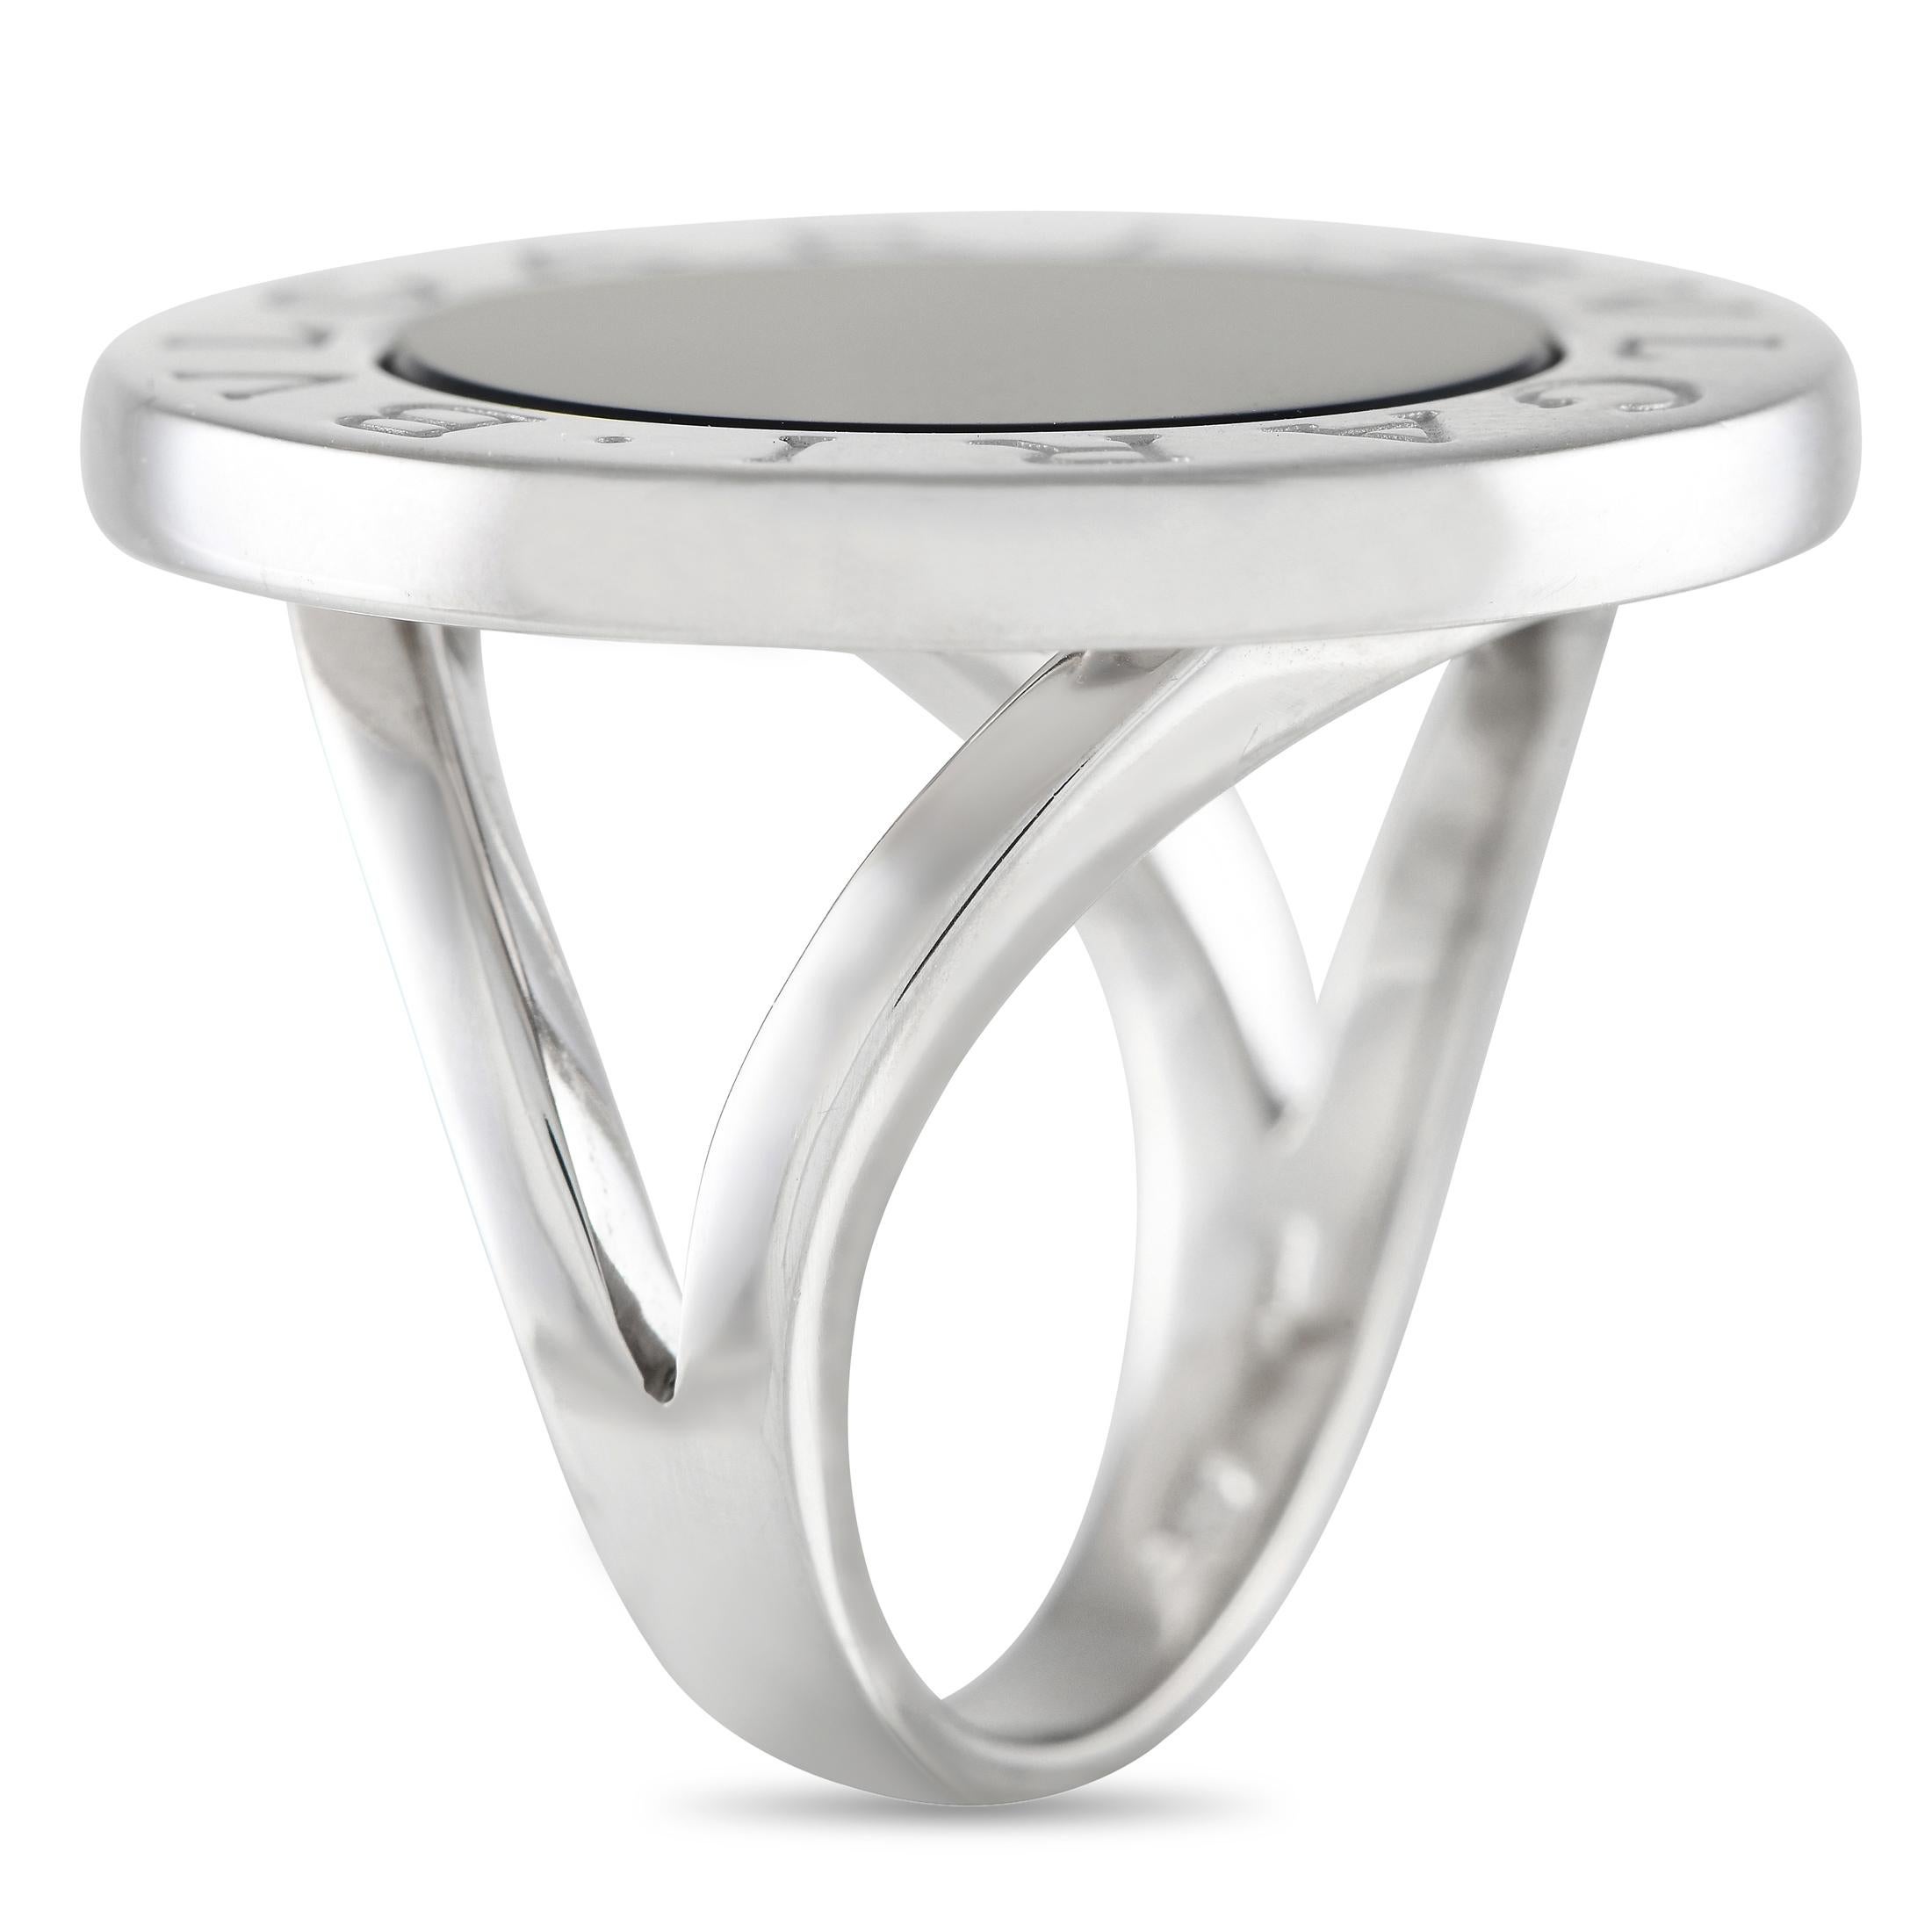 Stylish and elegant, this Bvlgari ring is timeless in design. A circular Onyx stone sits at the center of a simple 18K White Gold setting, which also includes the luxury brand’s signature engraved around the perimeter. This piece features a band